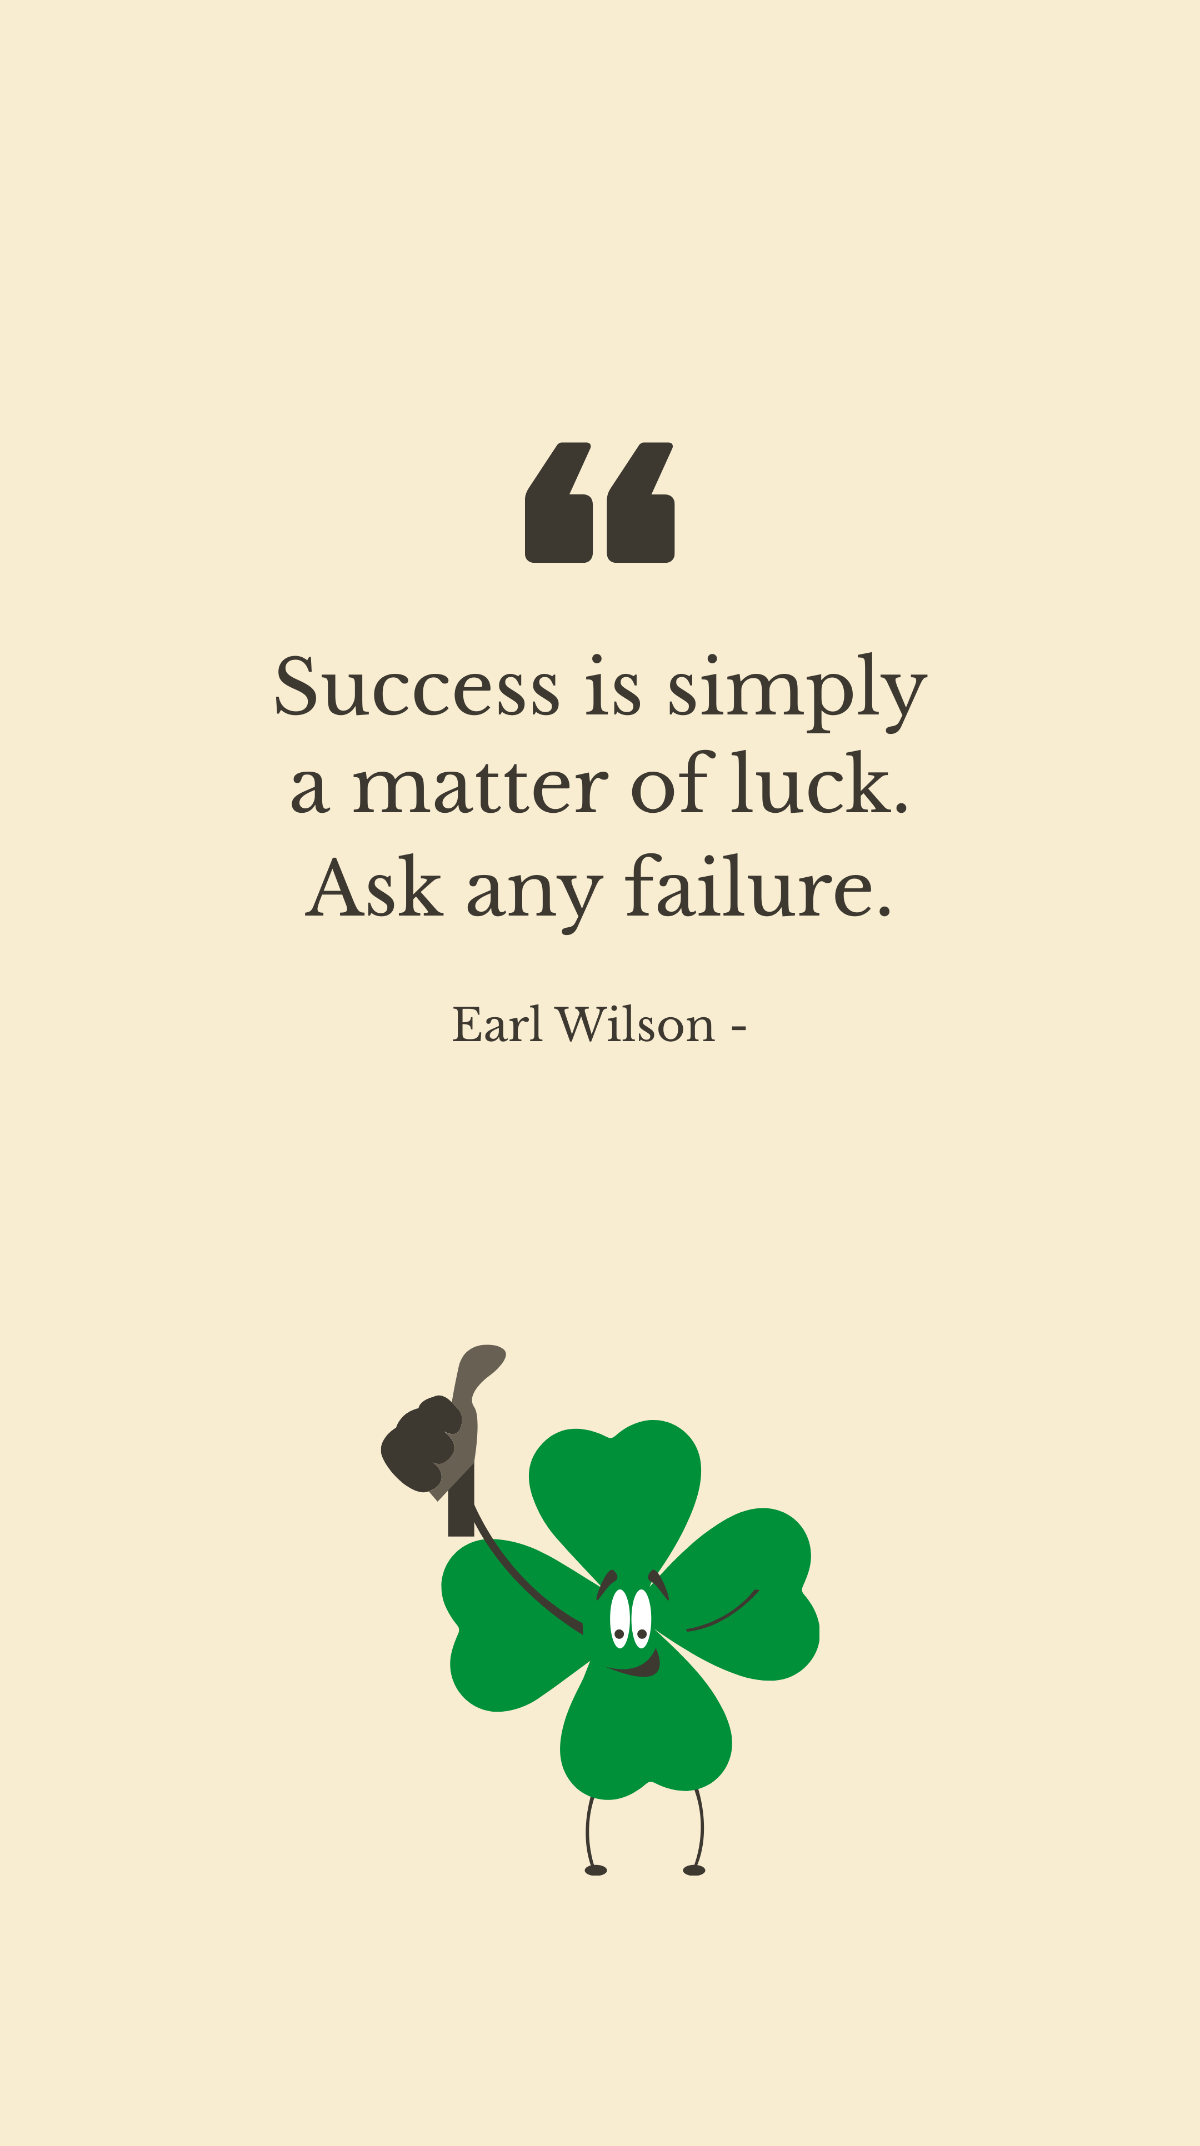 Earl Wilson - Success is simply a matter of luck. Ask any failure. Template